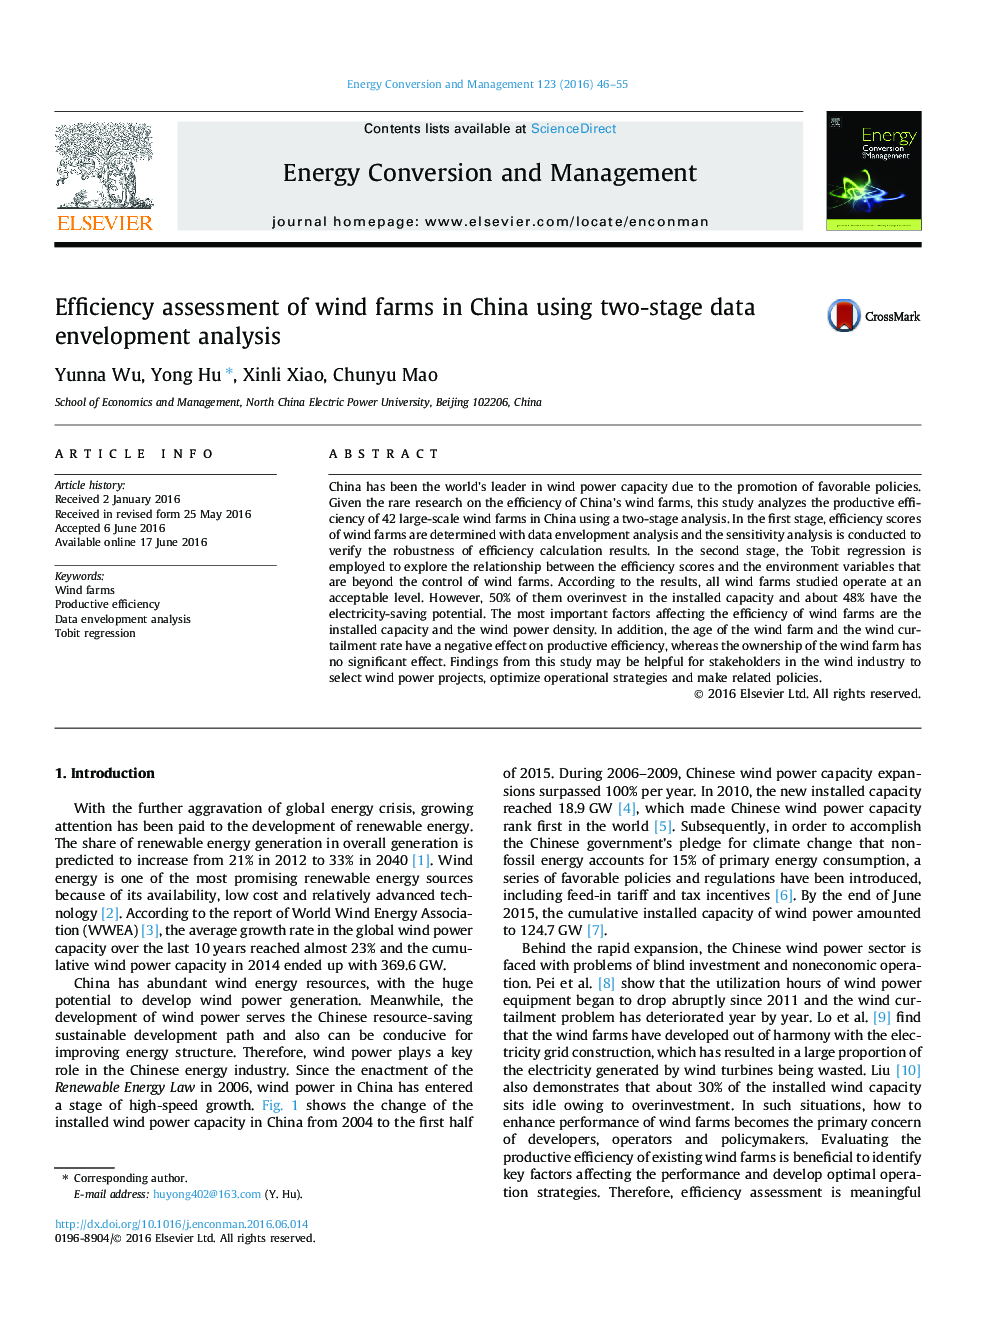 Efficiency assessment of wind farms in China using two-stage data envelopment analysis